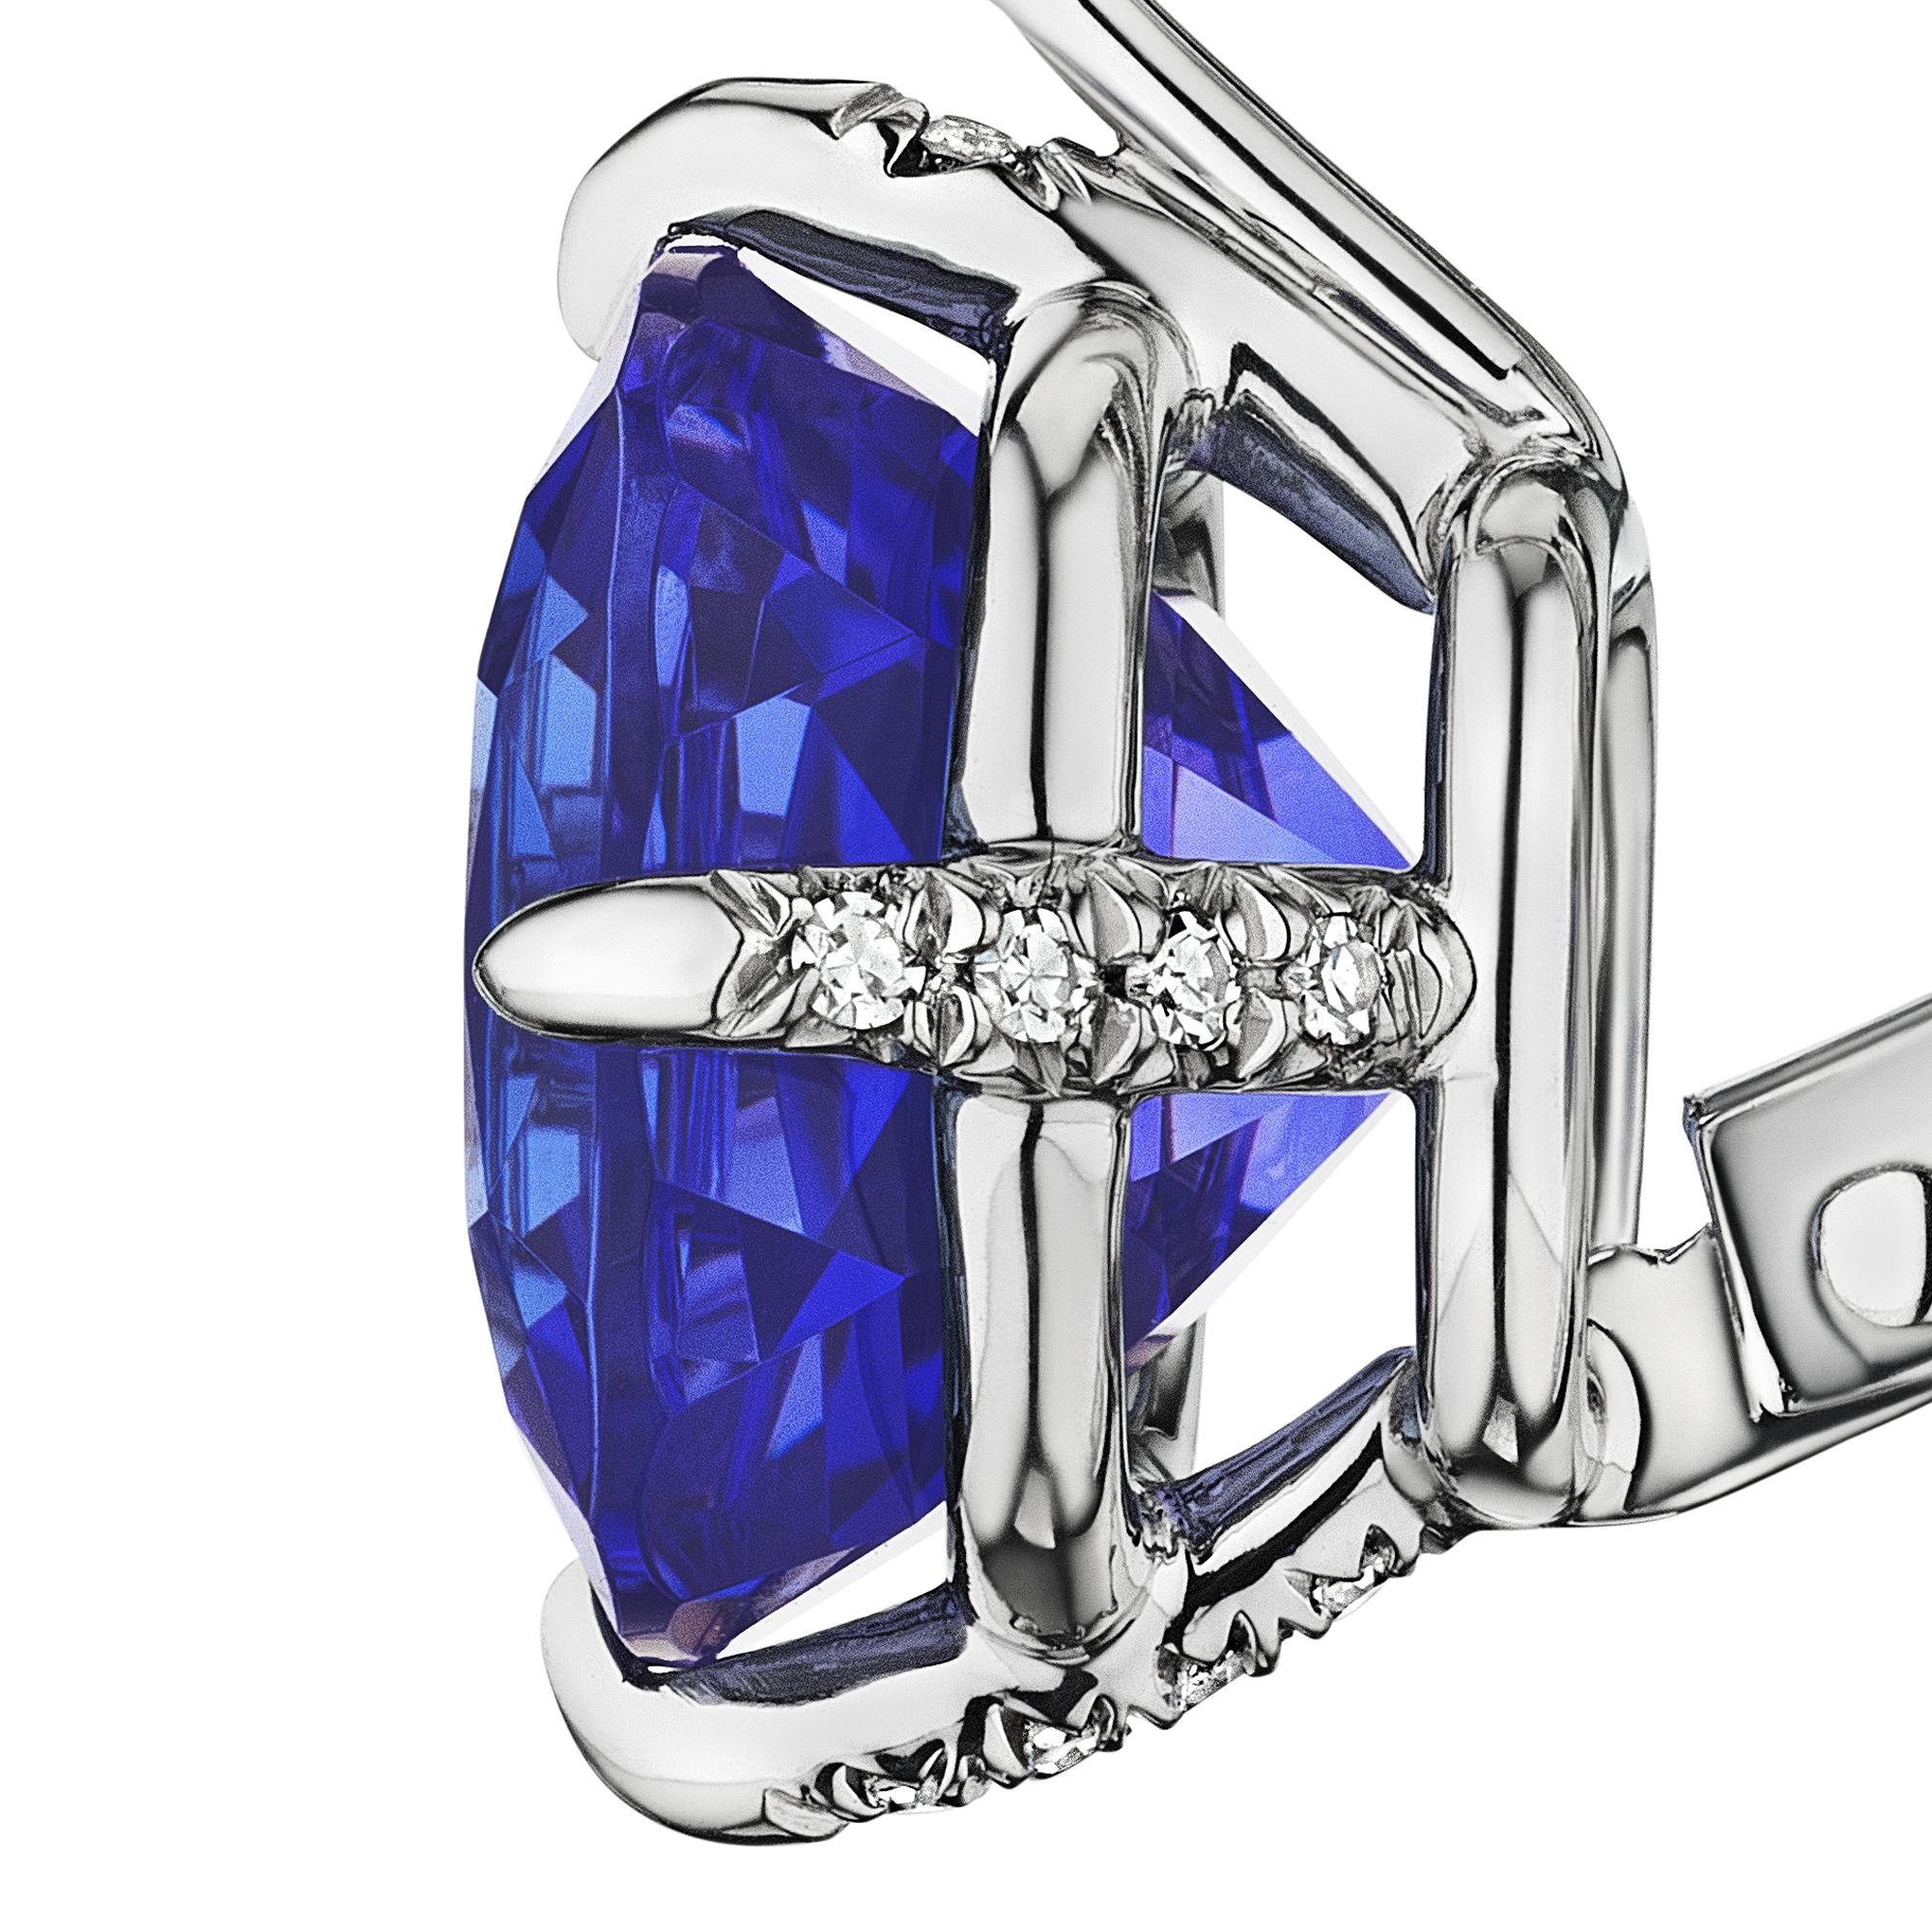 As romantic and dreamy as a velvet blue star lite night sky, these 11.25 carat cushion cut tanzanite earrings are mesmerizing.  Mounted in platinum with diamond accents with lever backs.  Designed by Steven Fox Jewelry.  Diamond weight .08 carats. 